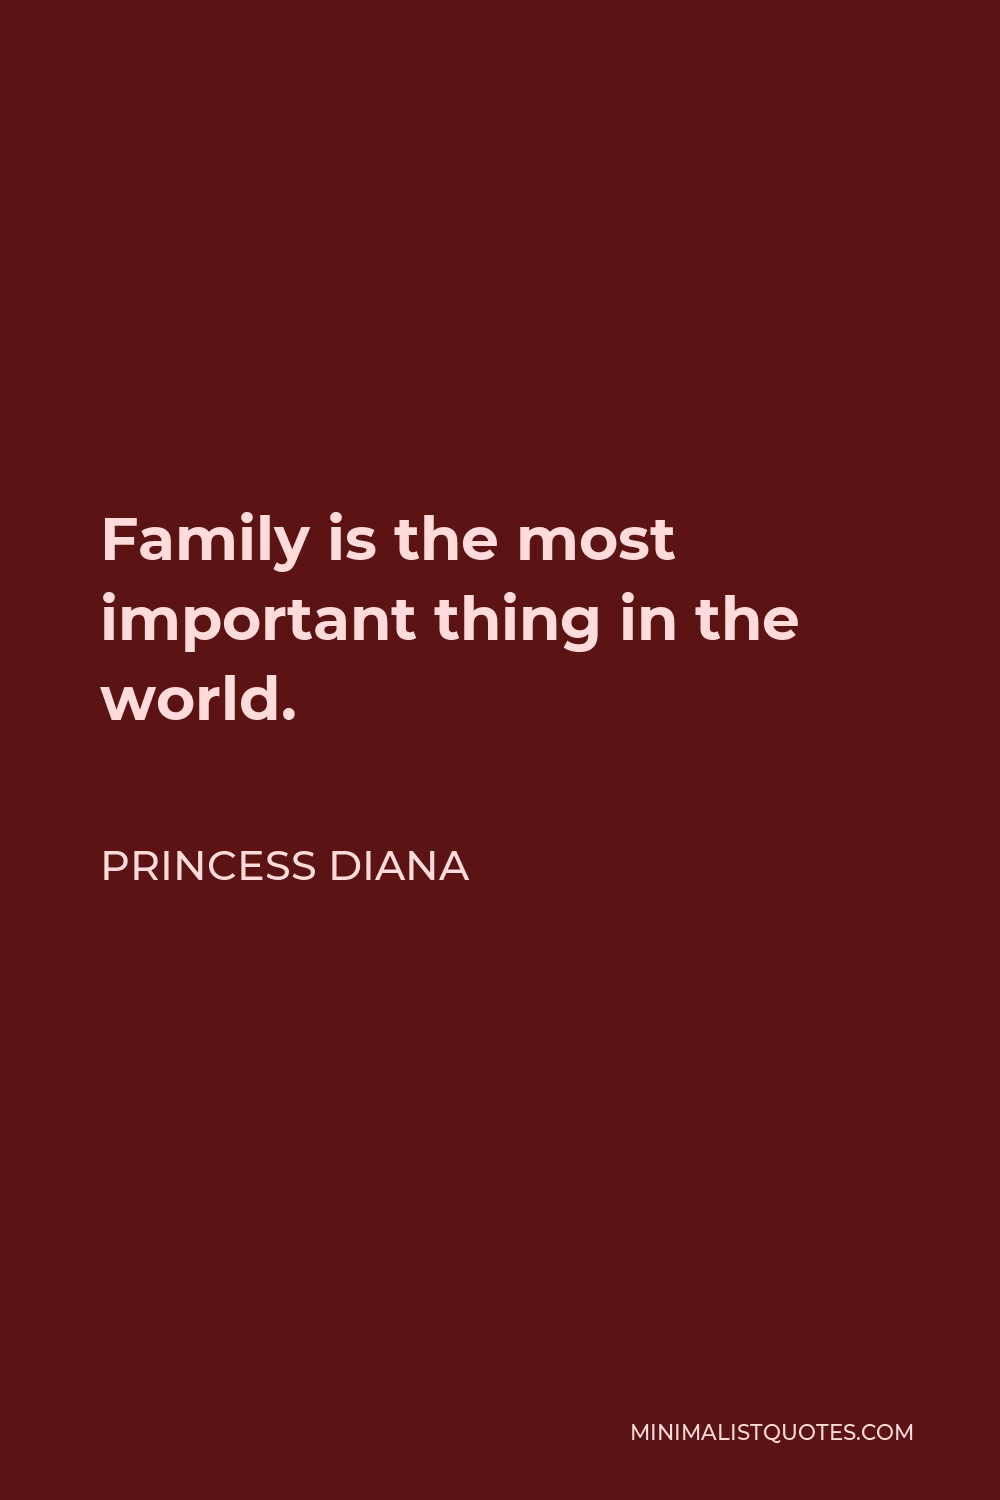 Princess Diana Quote - Family is the most important thing in the world.